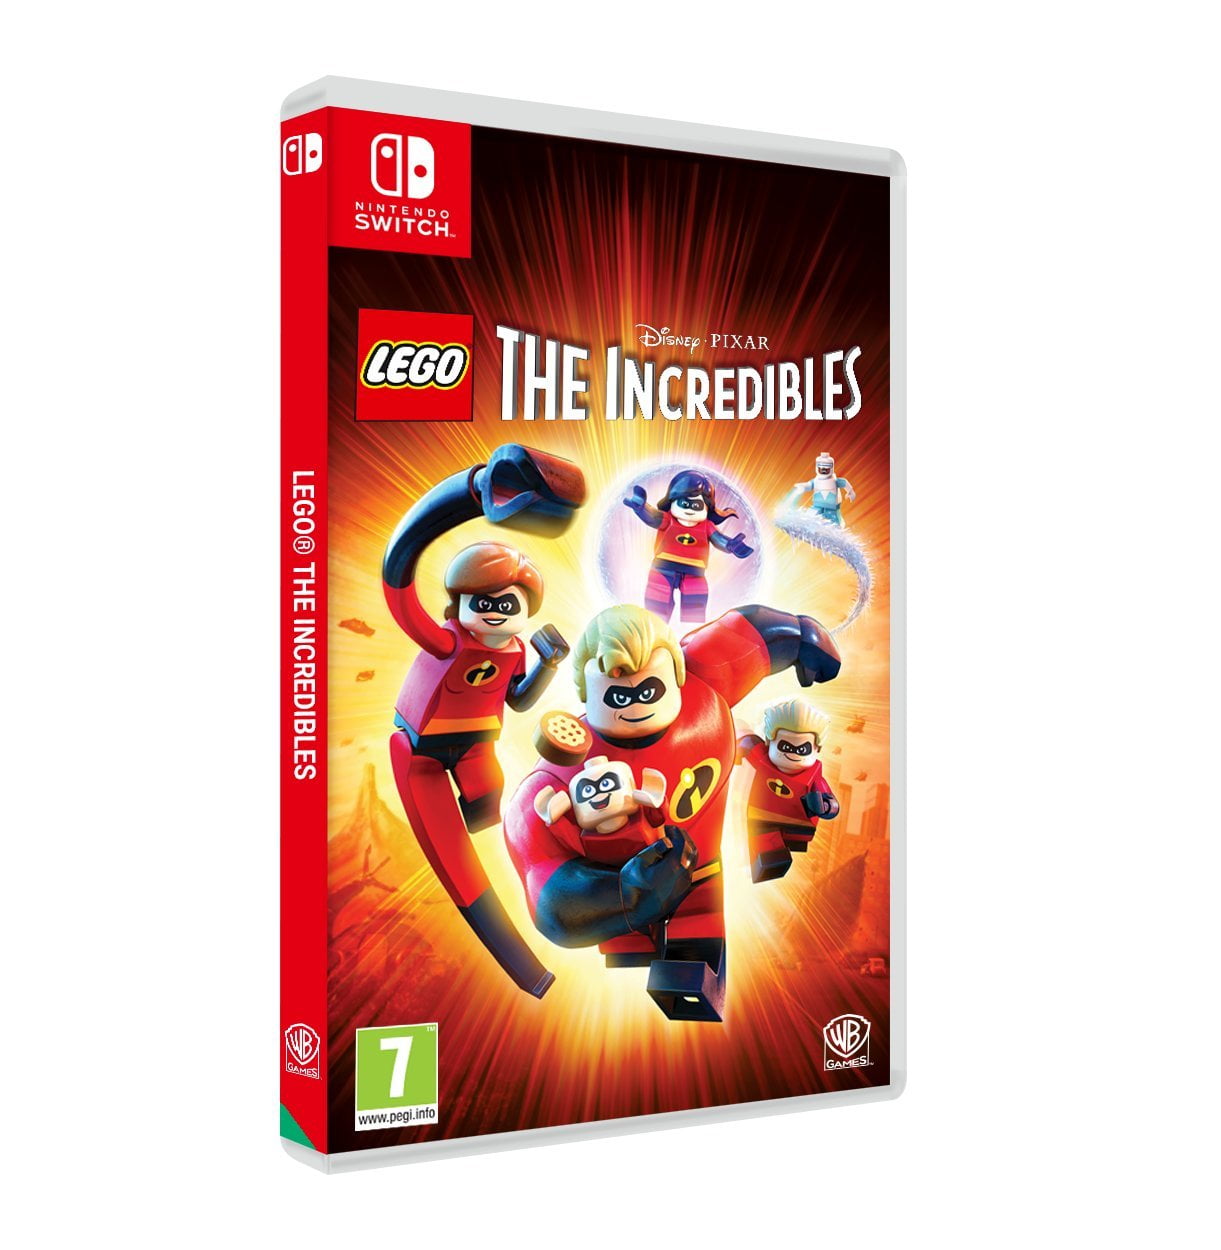 LEGO The Incredibles Switch), the thrilling adventures of the Parr family as they conquer crime and life through both.., By Brand Warner Bros Walmart.com